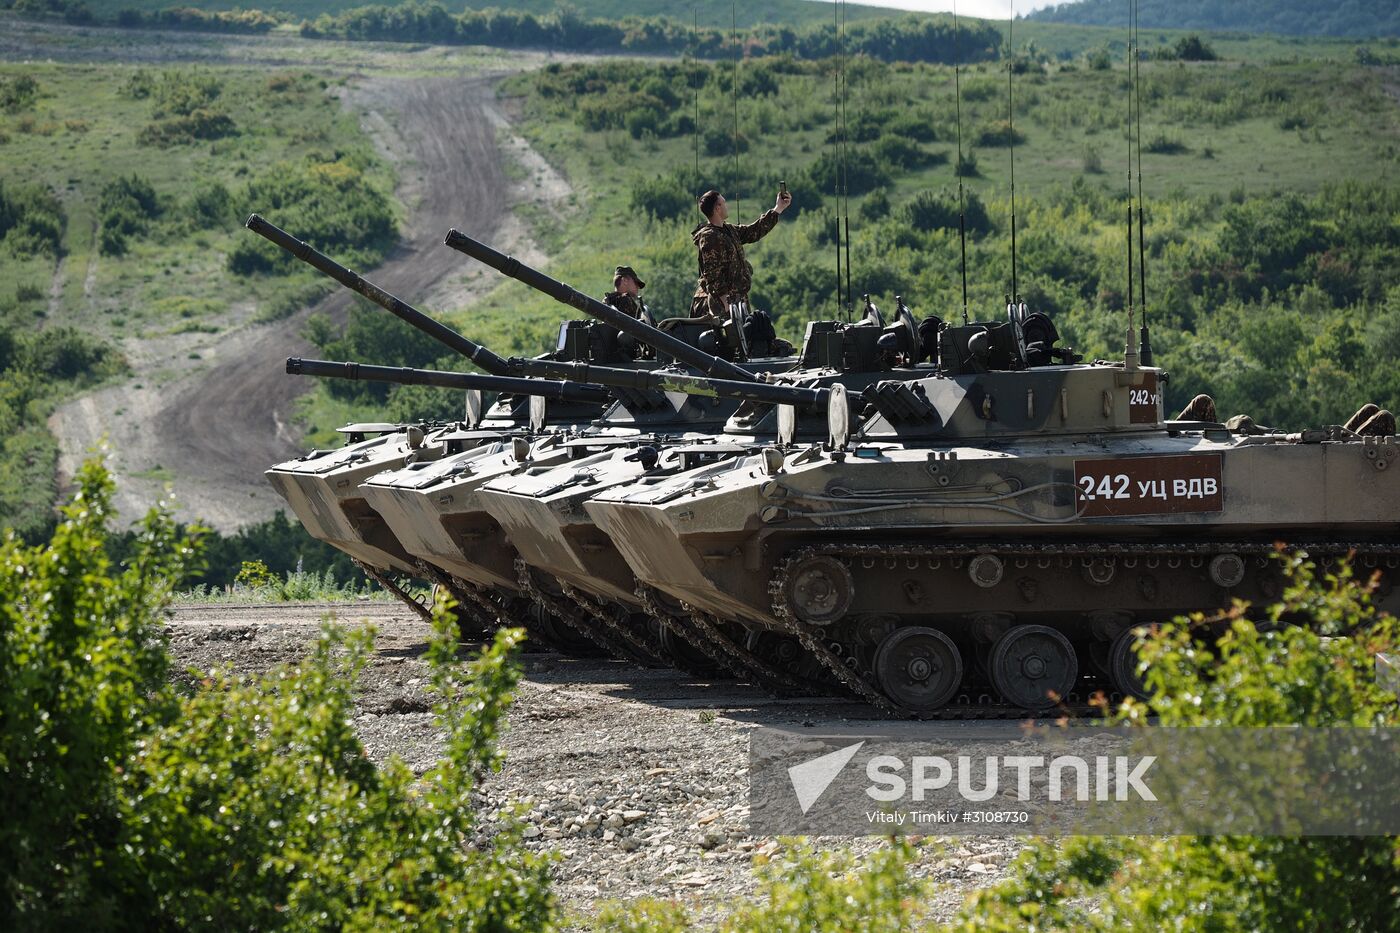 2017 Landing Troops military competition in Novorossiisk